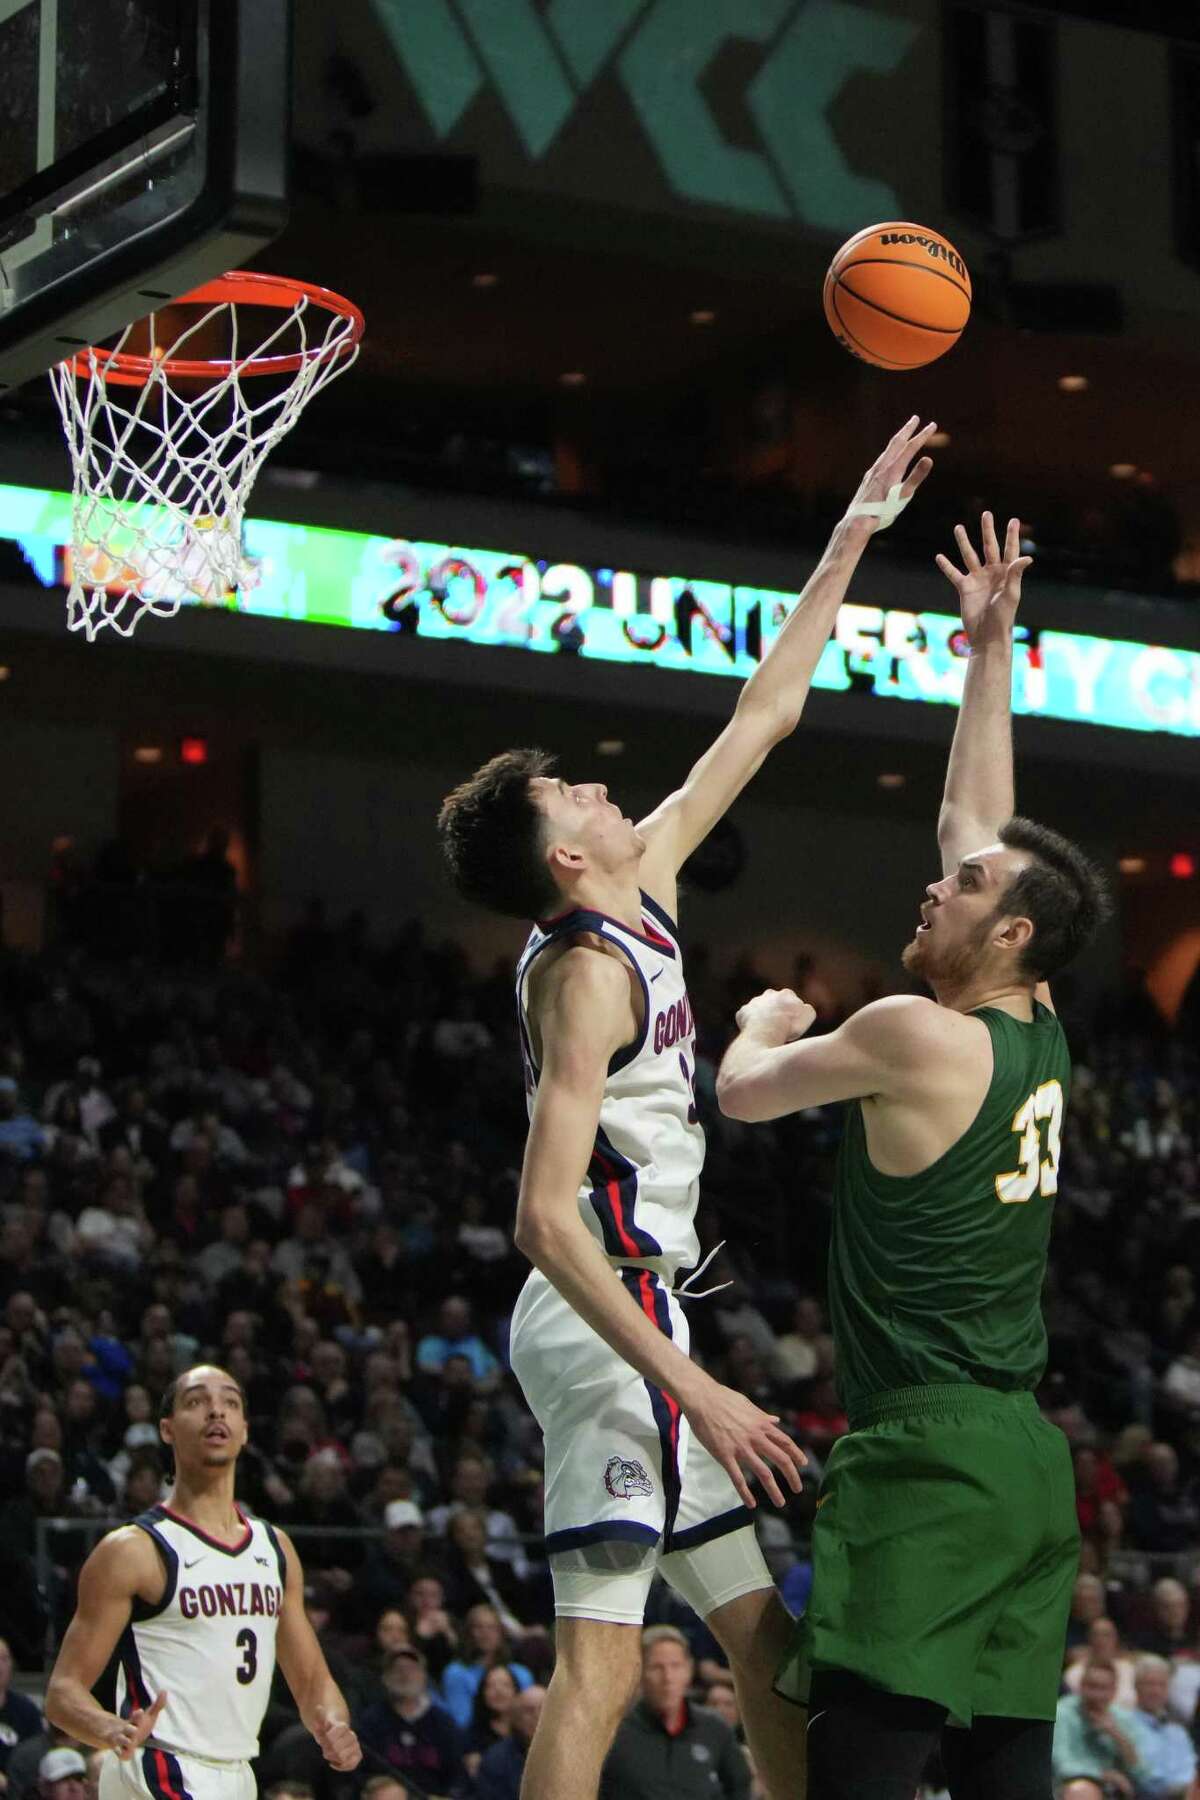 LAS VEGAS, NEVADA - MARCH 07: Chet Holmgren #34 of the Gonzaga Bulldogs gets the block on a shot attempt by Volodymyr Markovetskyy #33 of the San Francisco Dons during a semifinal game of the West Coast Conference basketball tournament at the Orleans Arena on March 07, 2022 in Las Vegas, Nevada. (Photo by Joe Buglewicz/Getty Images)